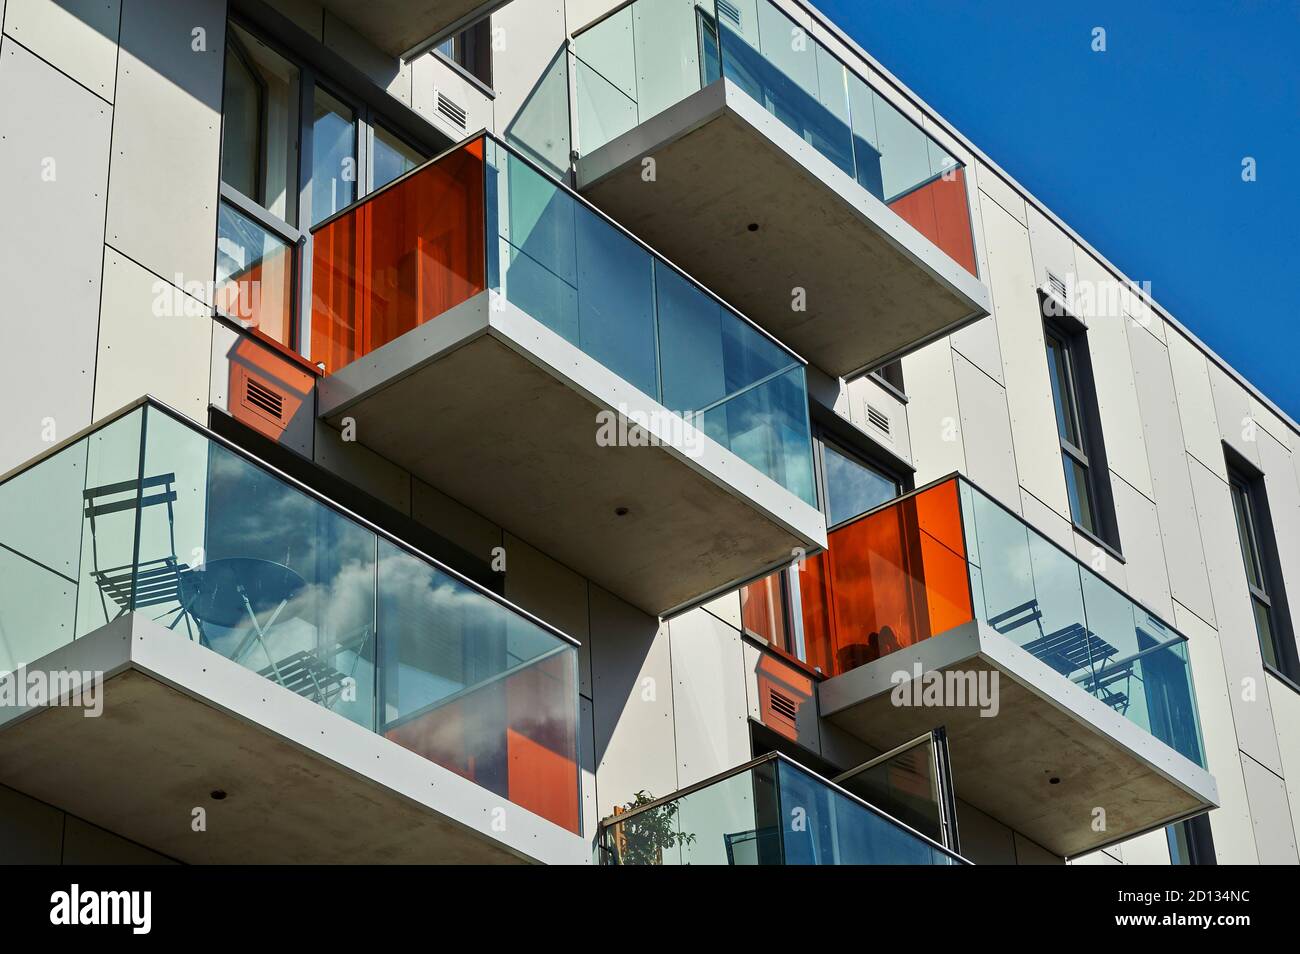 balconies on Apartment developments, New Homes in south east England, UK Stock Photo